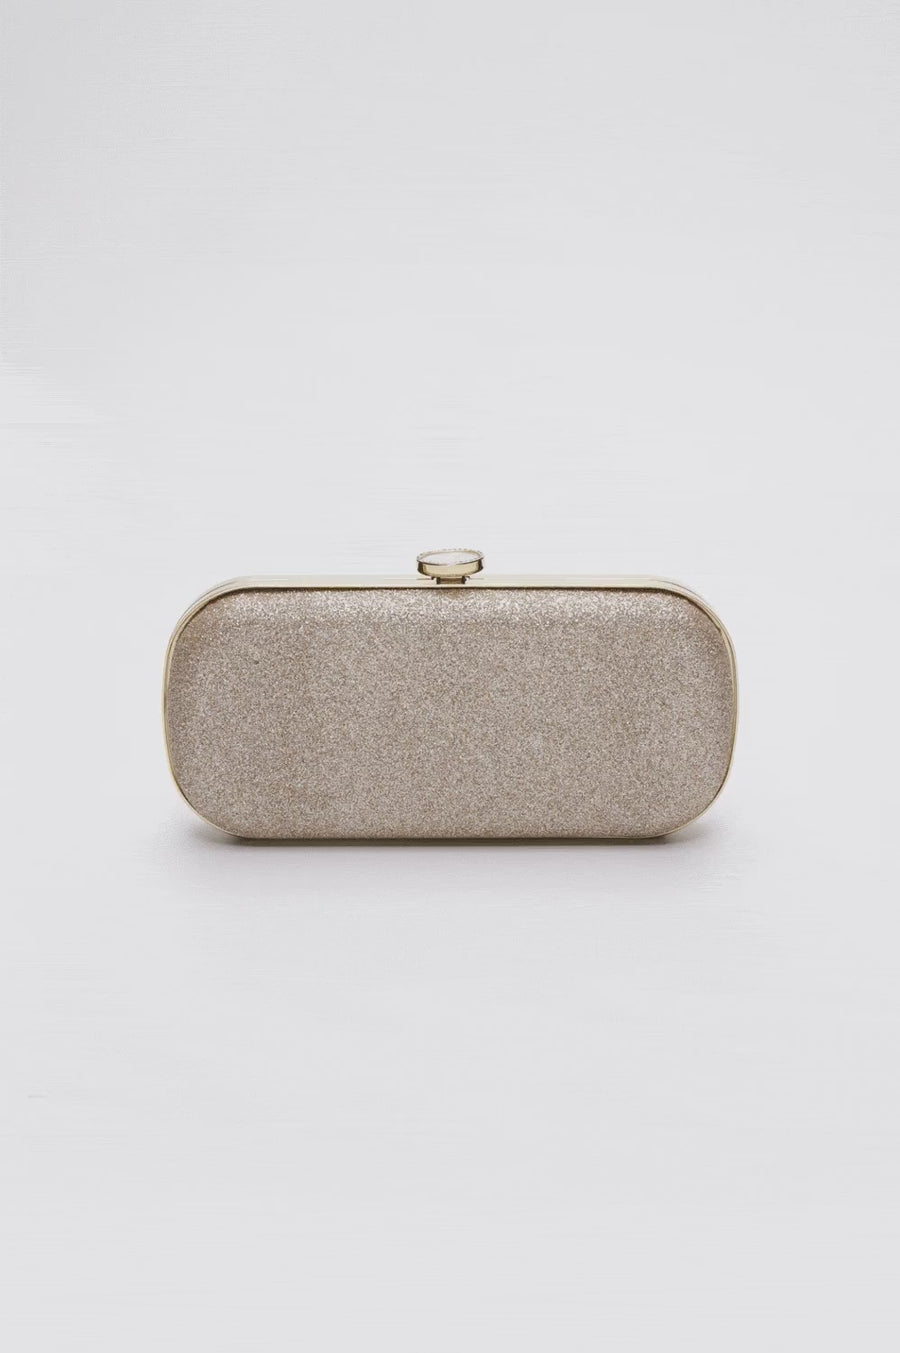 360 view of Bella clutch with gold hardware in Champagne Shimmer.